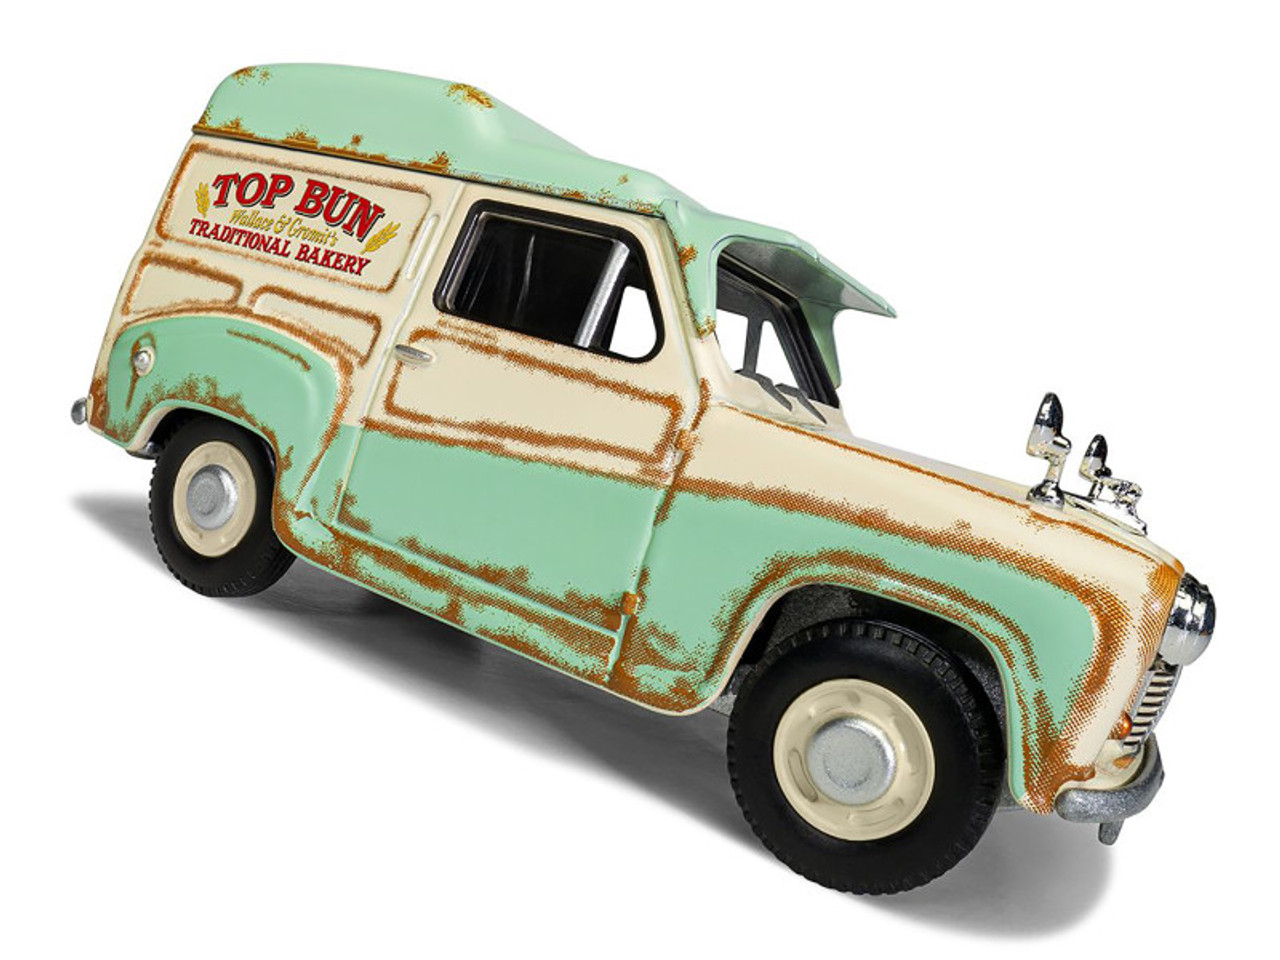 "Wallace & Gromit" Austin A35 Van Collection Set of 3 Pieces Diecast Model Cars by Corgi